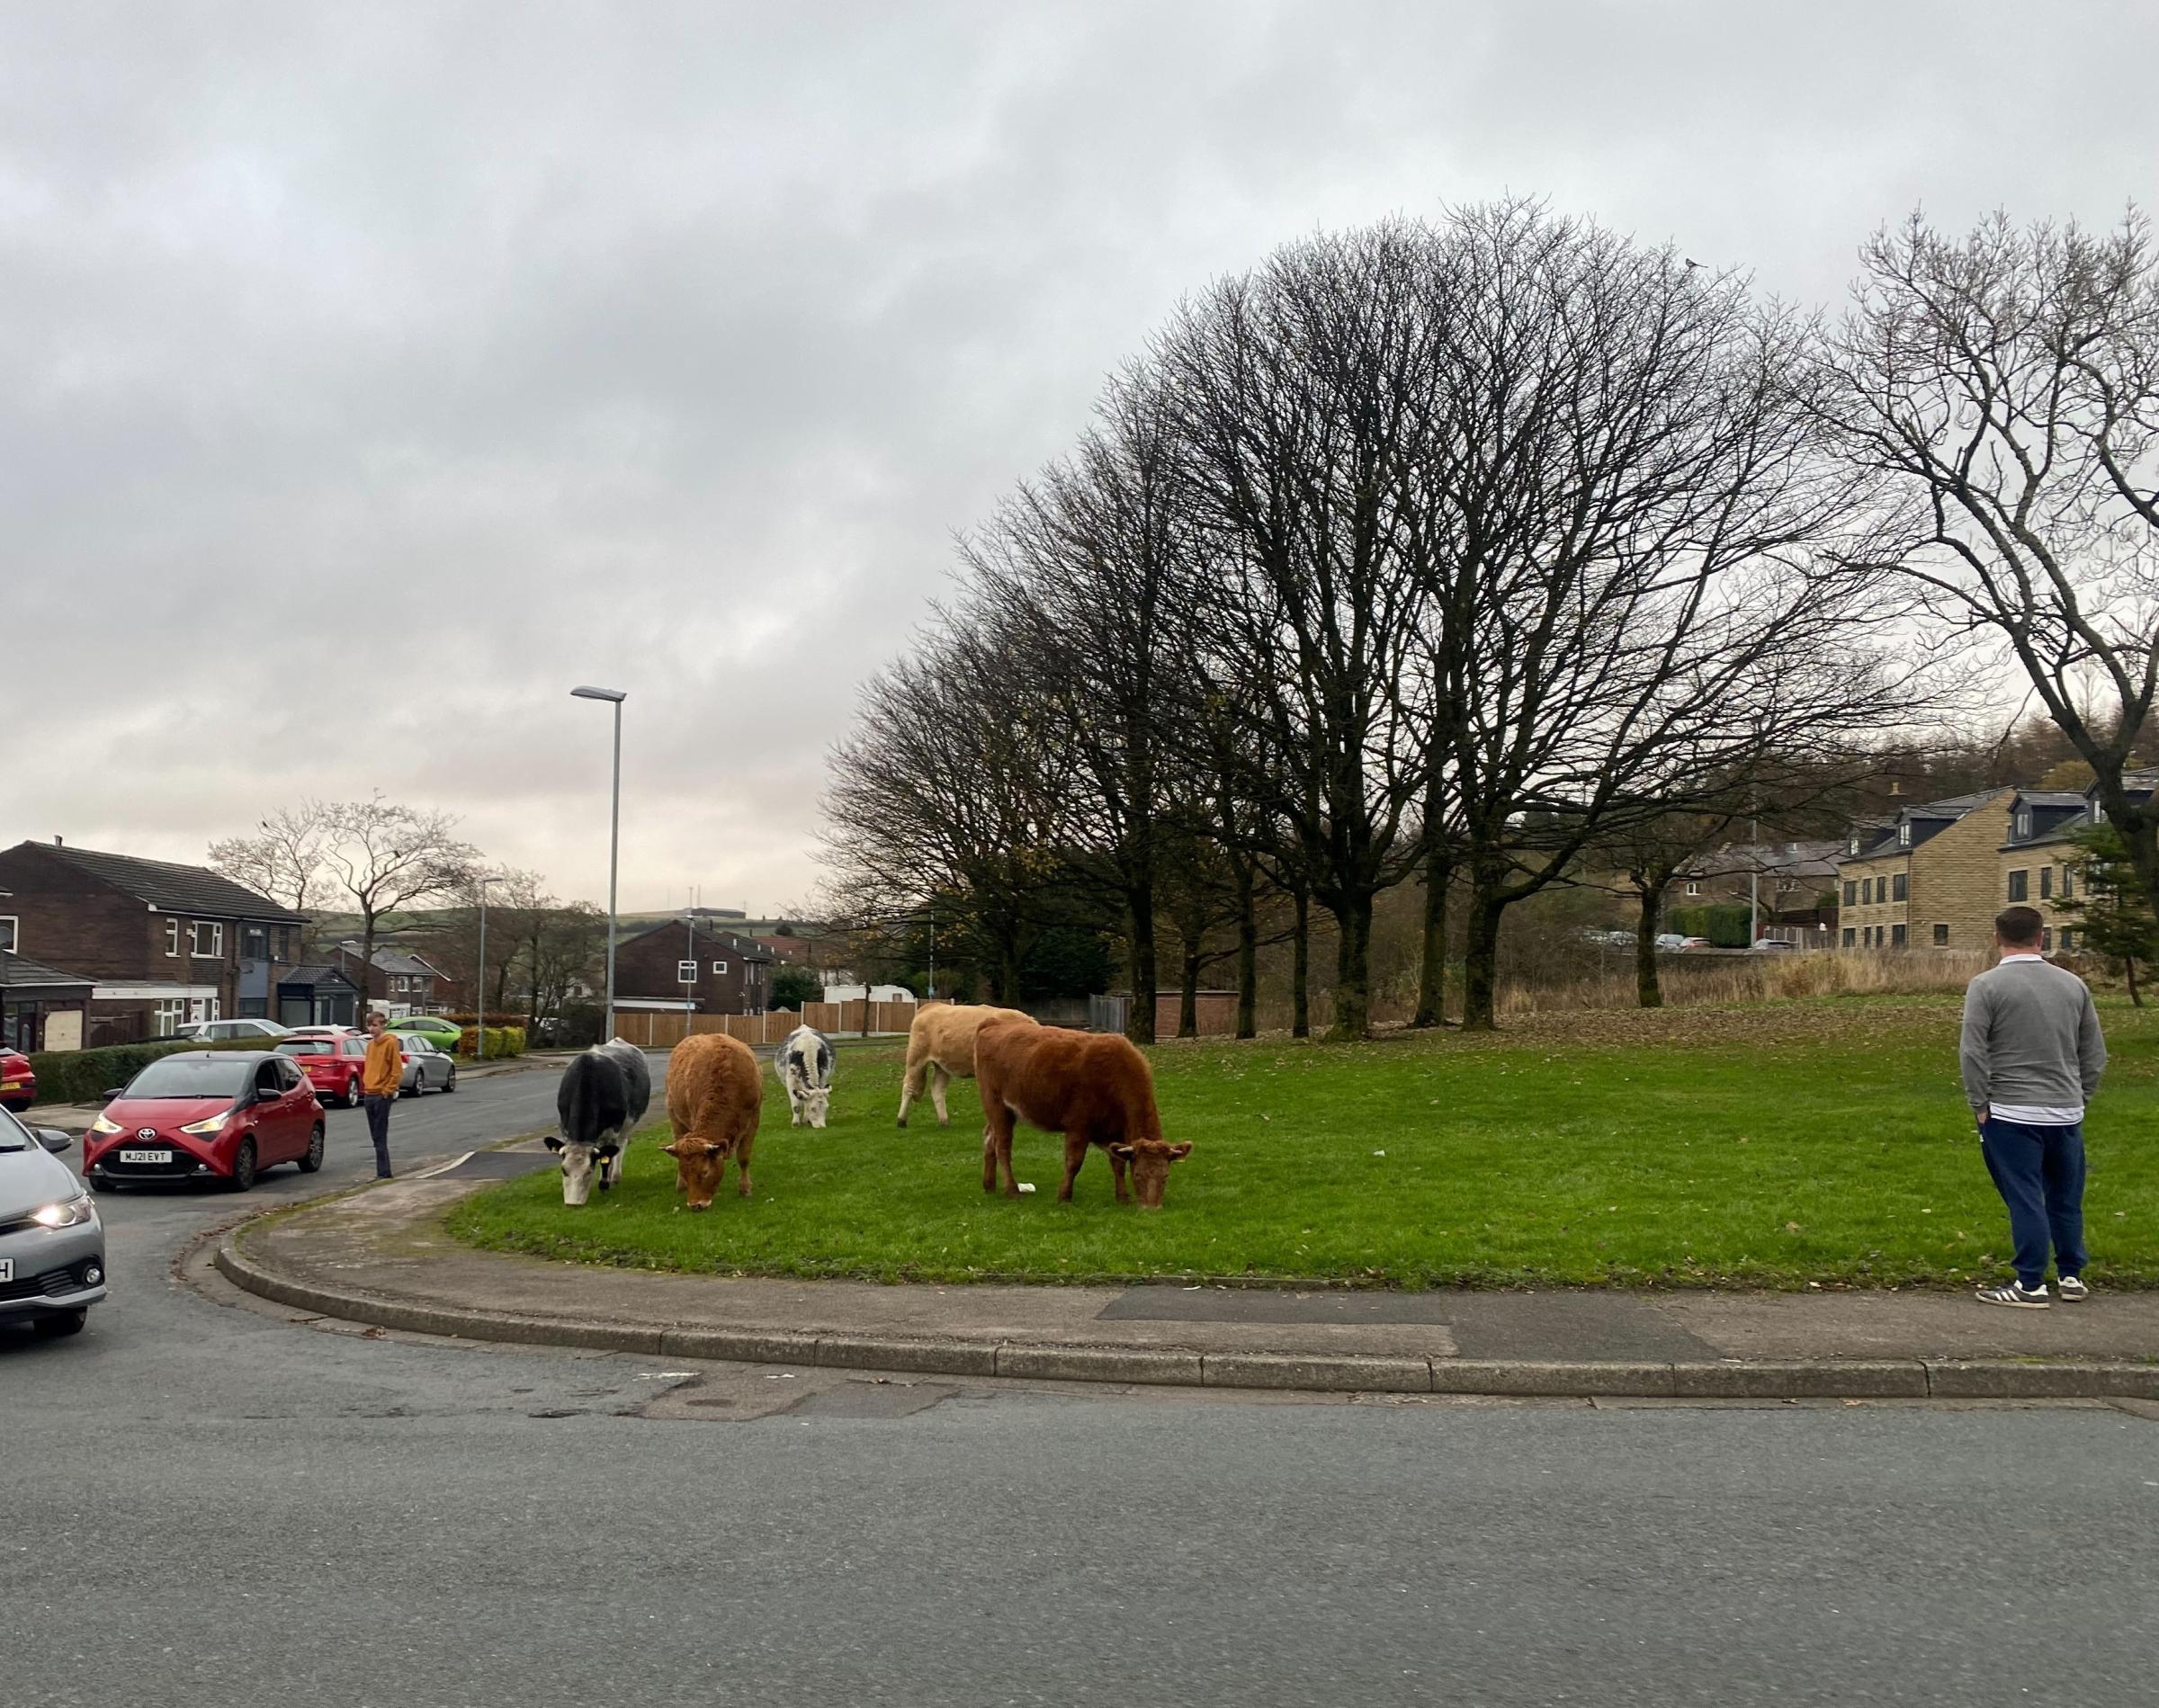 Residents were left puzzled by the cows impromtu visit.